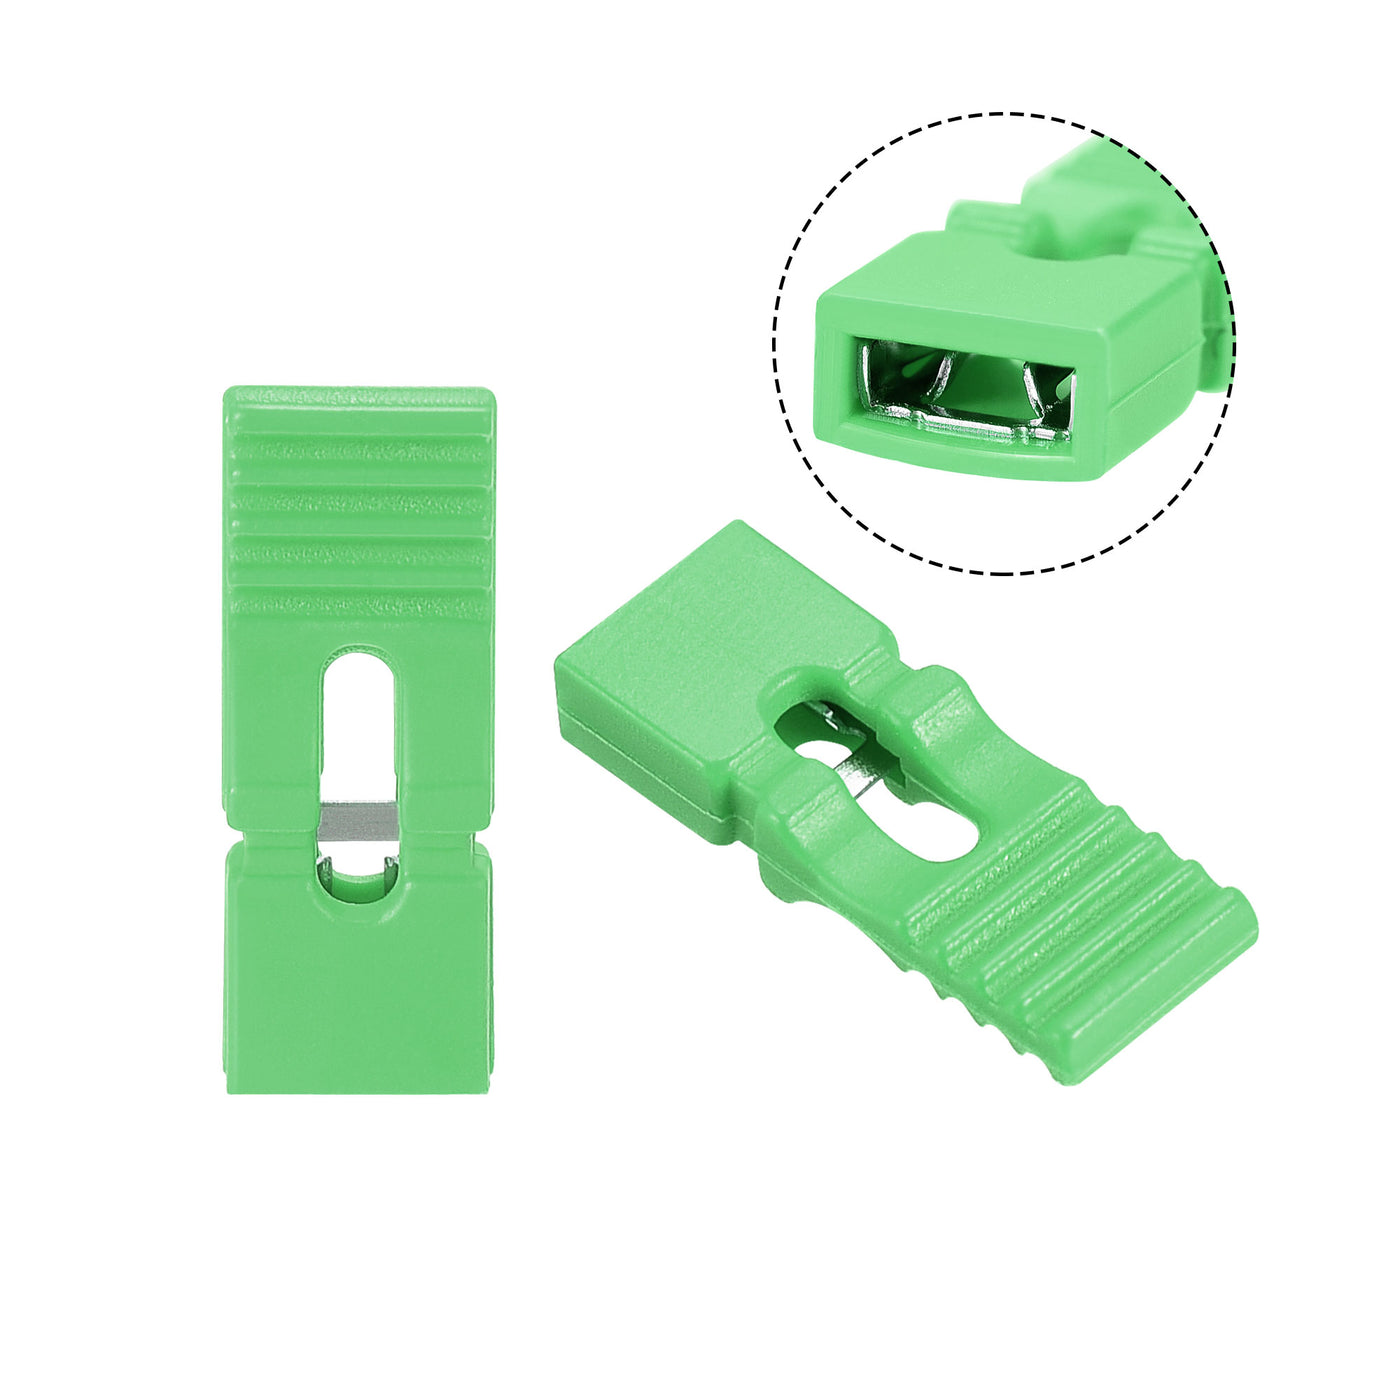 uxcell Uxcell 50pcs 2.54mm Jumper Cap Lengthened Short Circuit Connection Cap Green